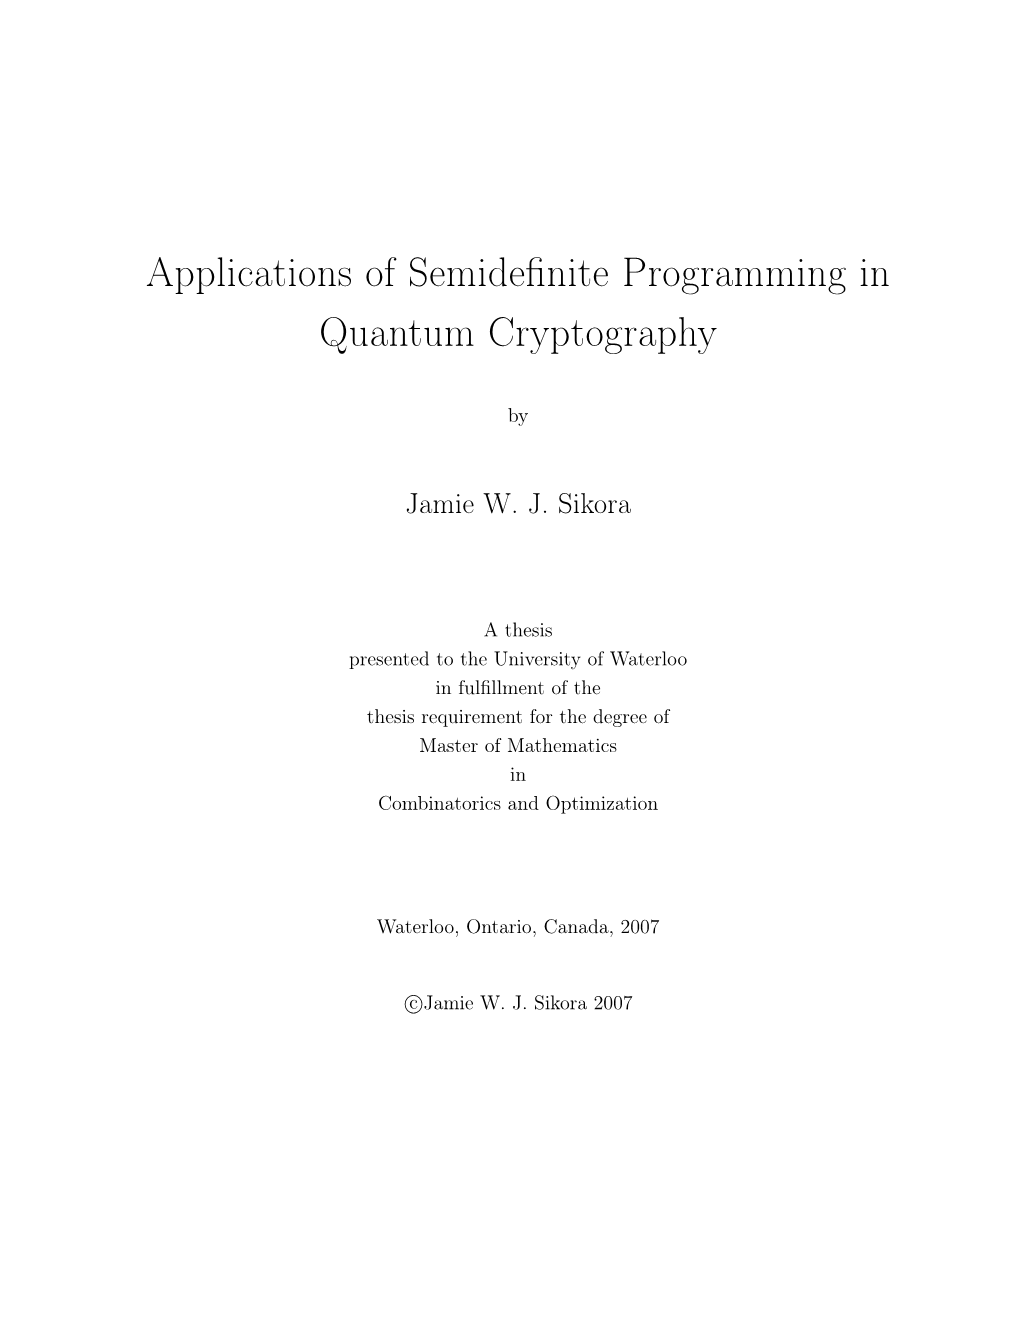 Applications of Semidefinite Programming in Quantum Cryptography